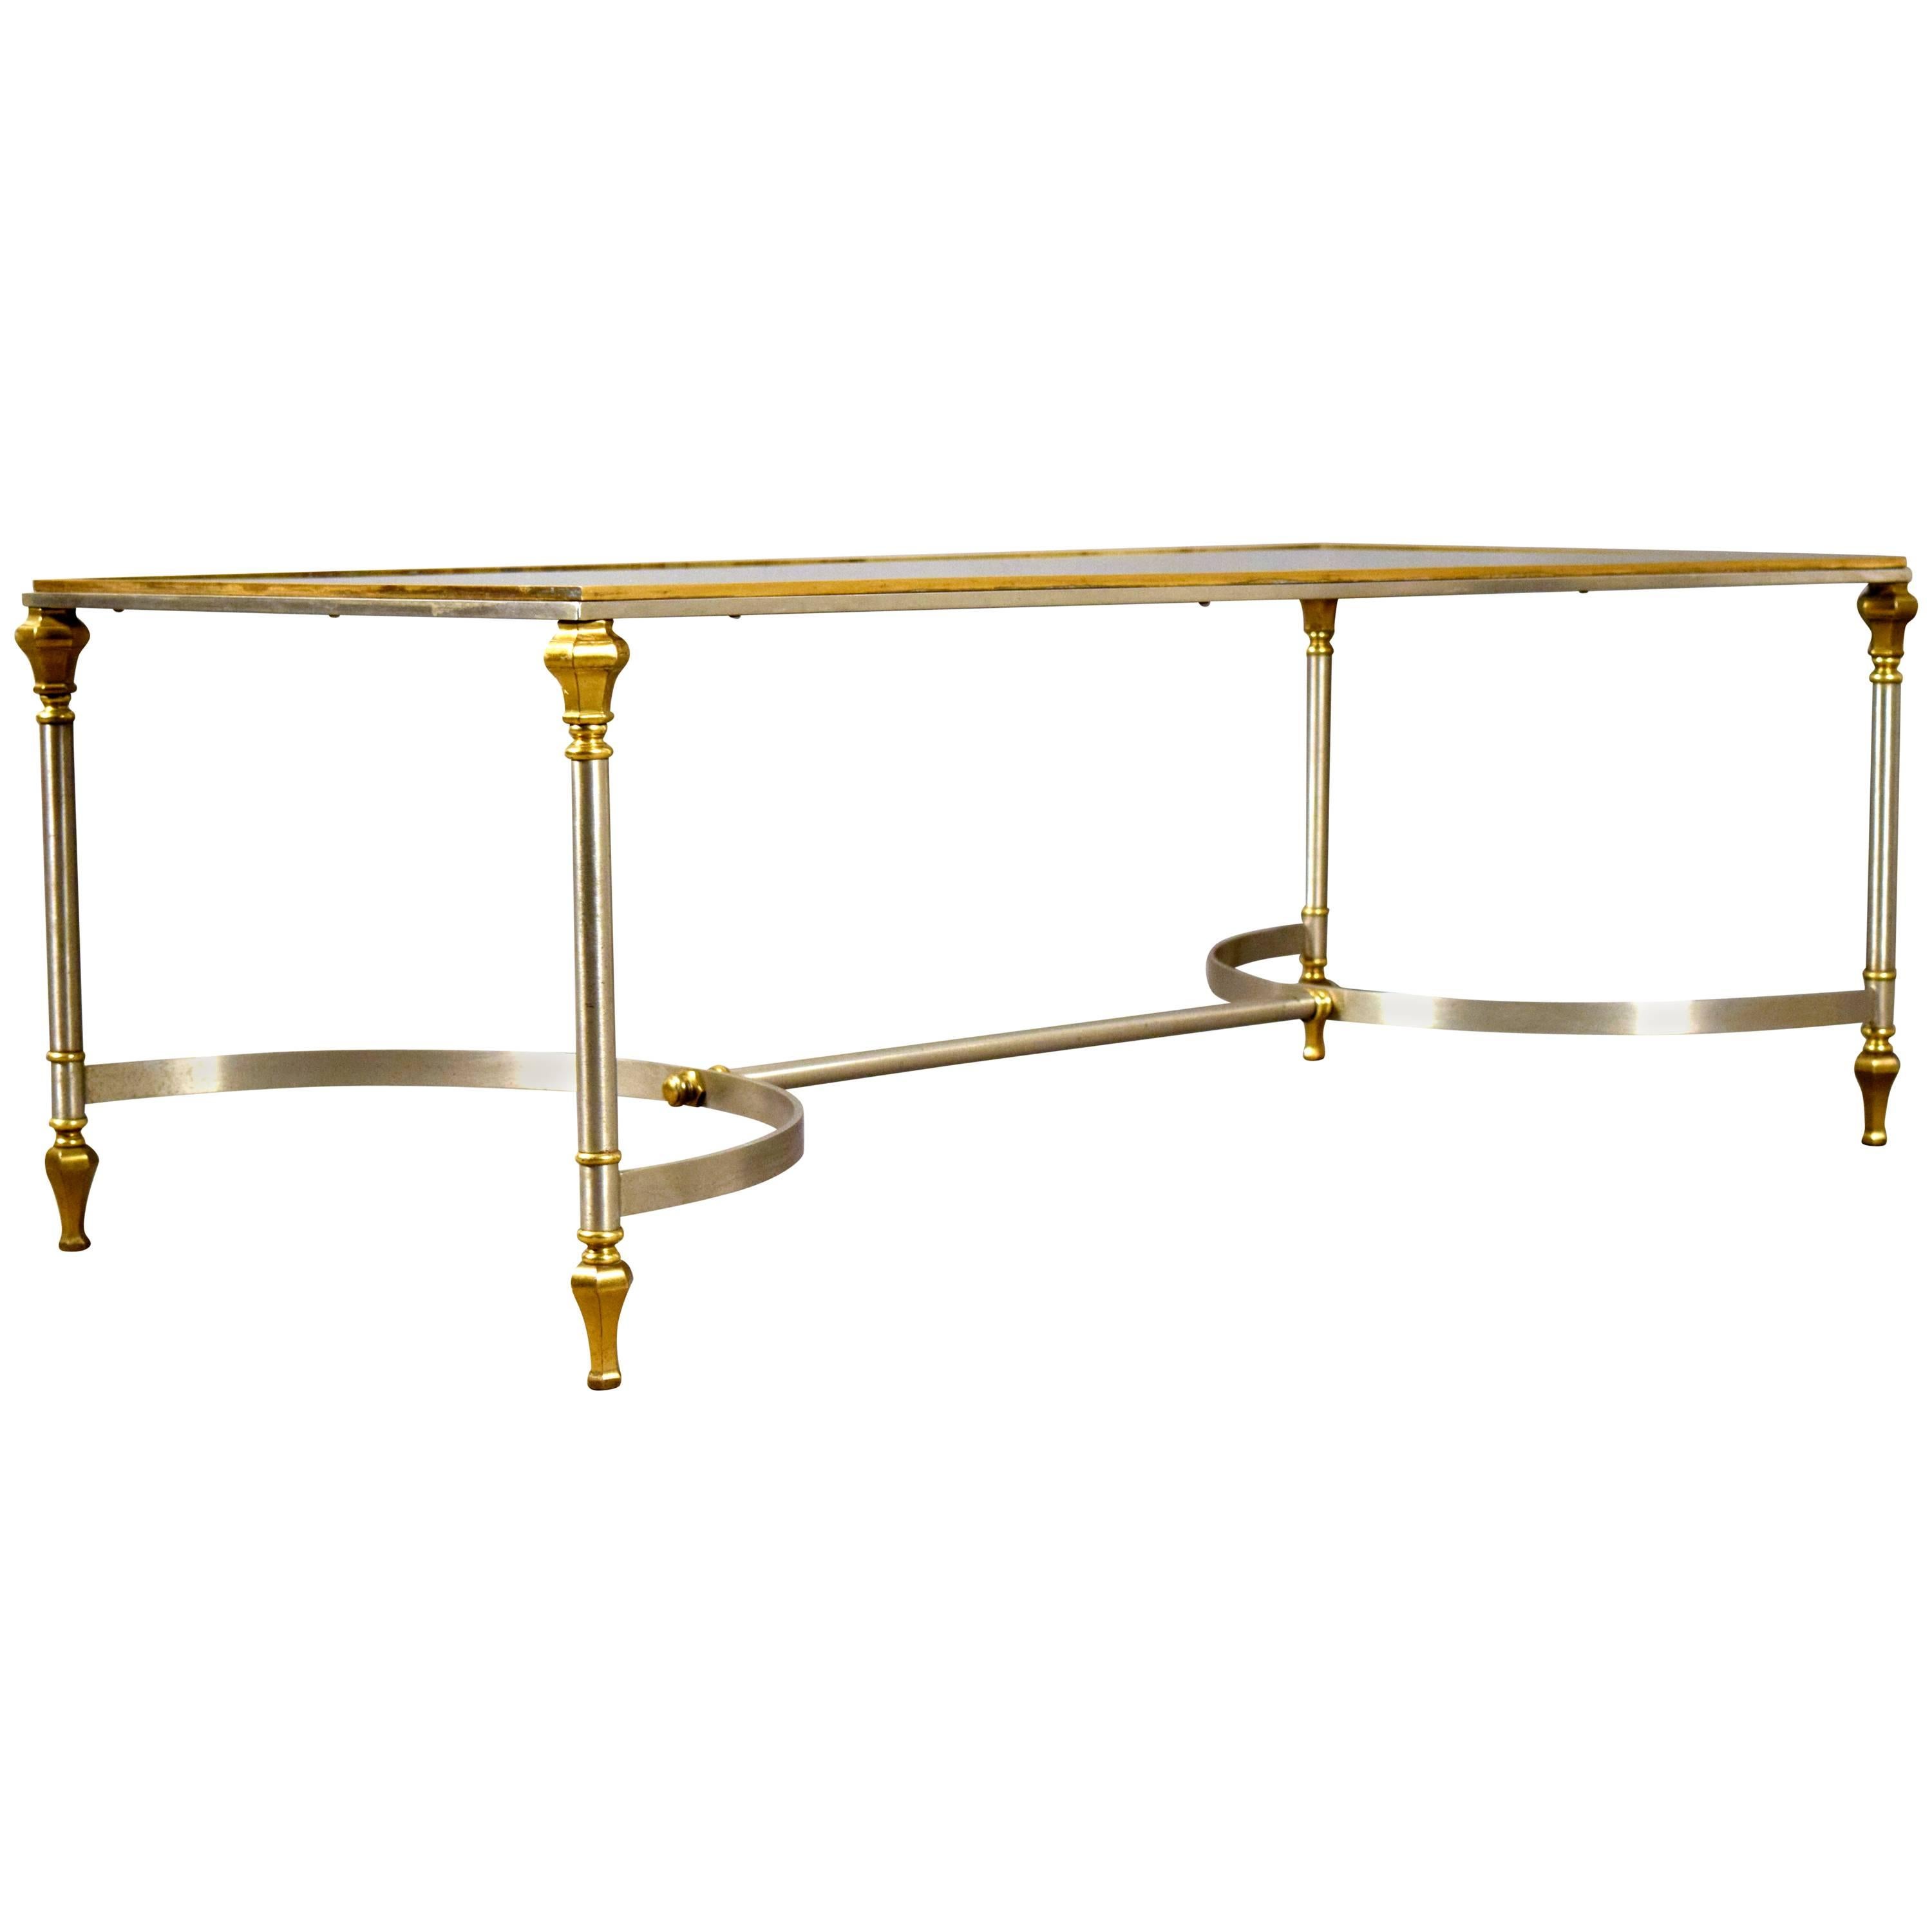 Maison Jansen Brass and Glass Coffee Table